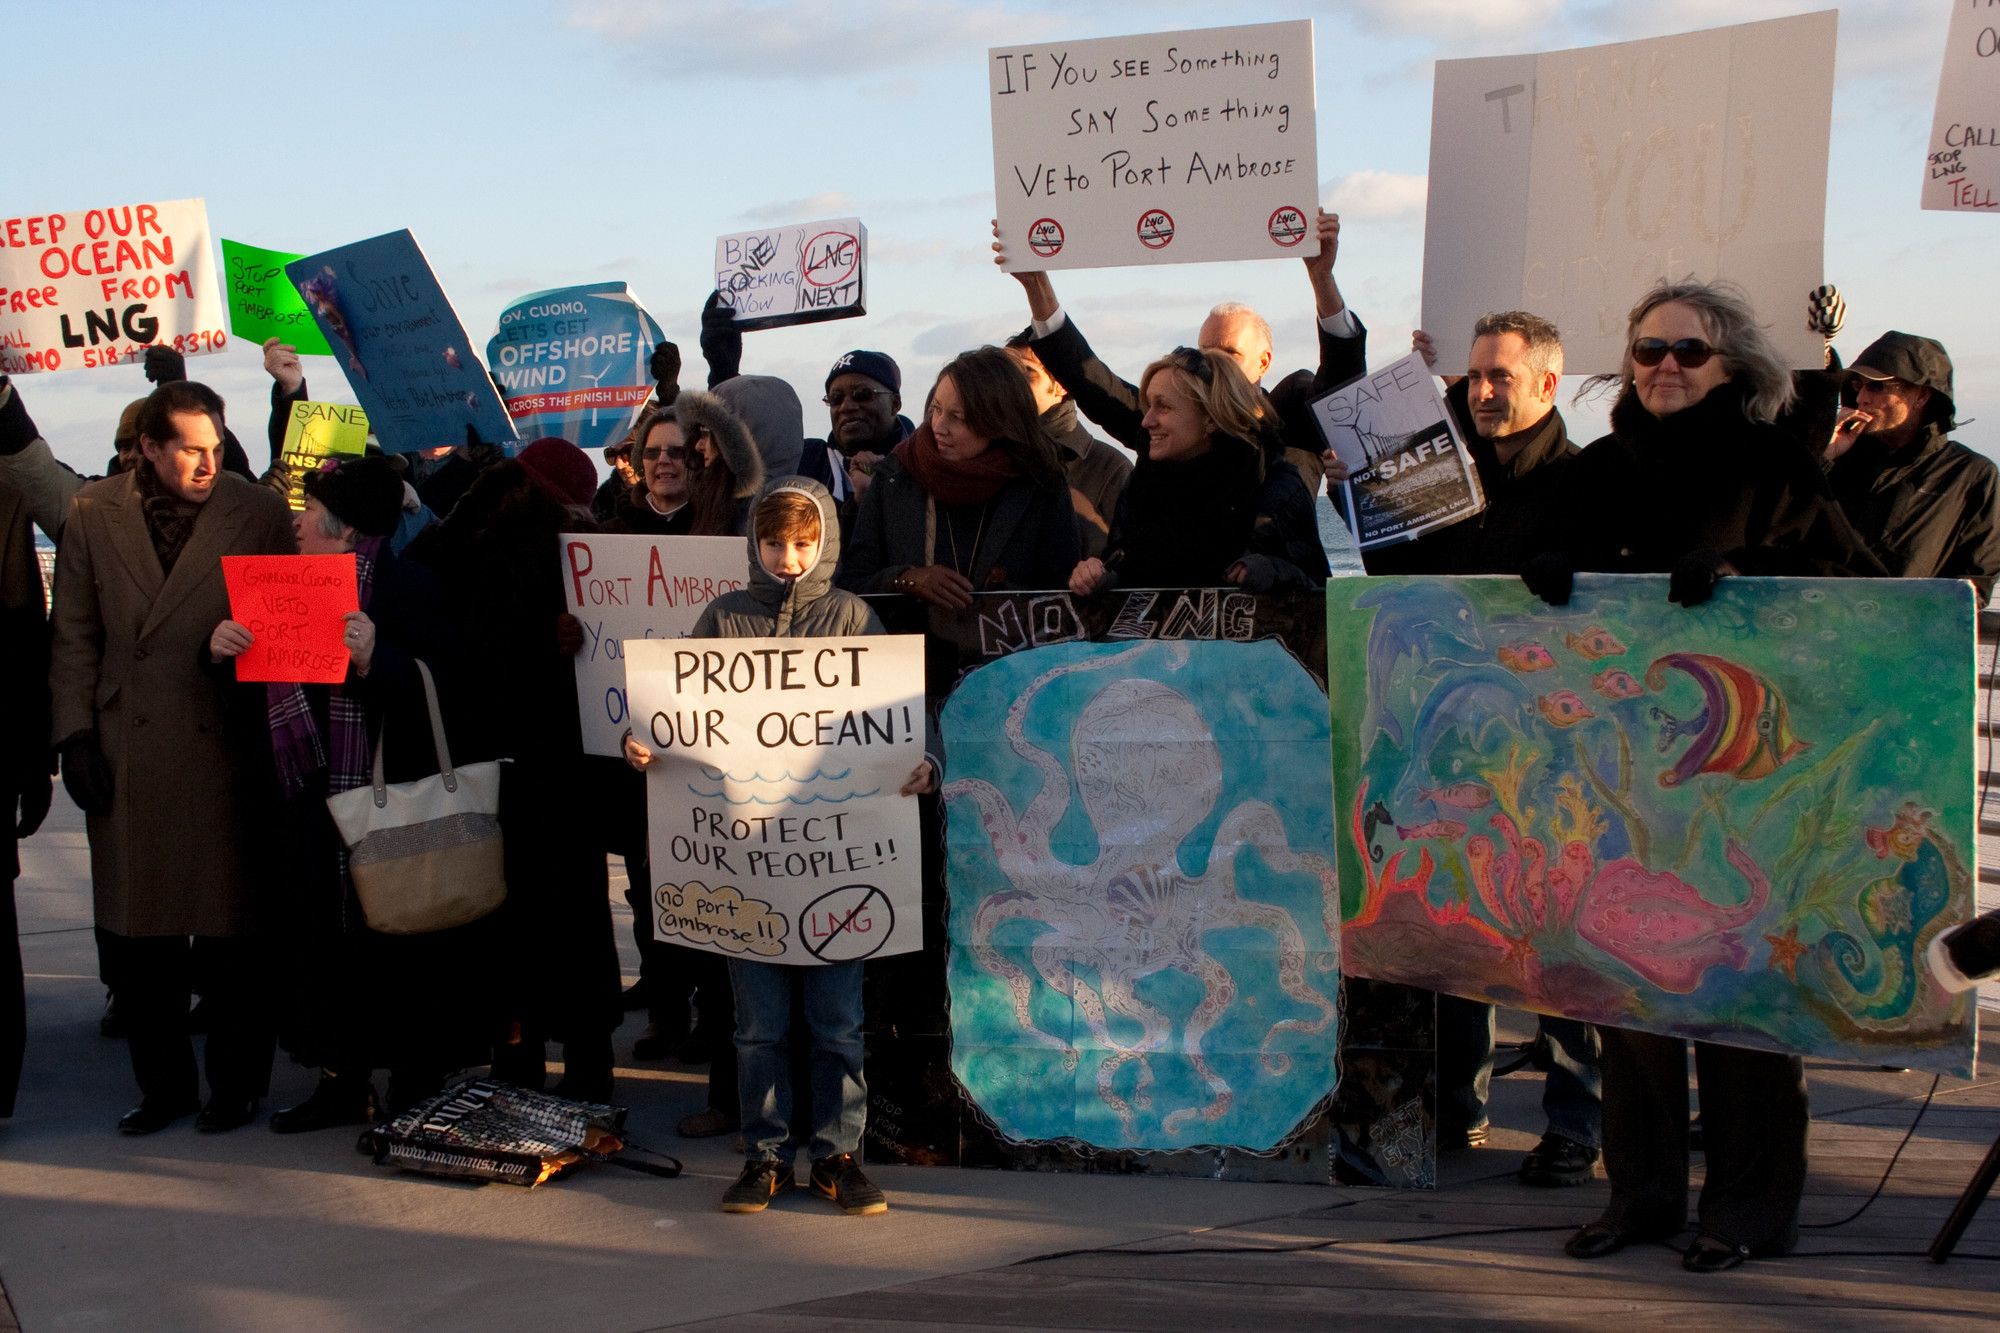 Protestors criticized the proposed Port Ambrose LNG terminal at a press conference on the boardwalk in January.